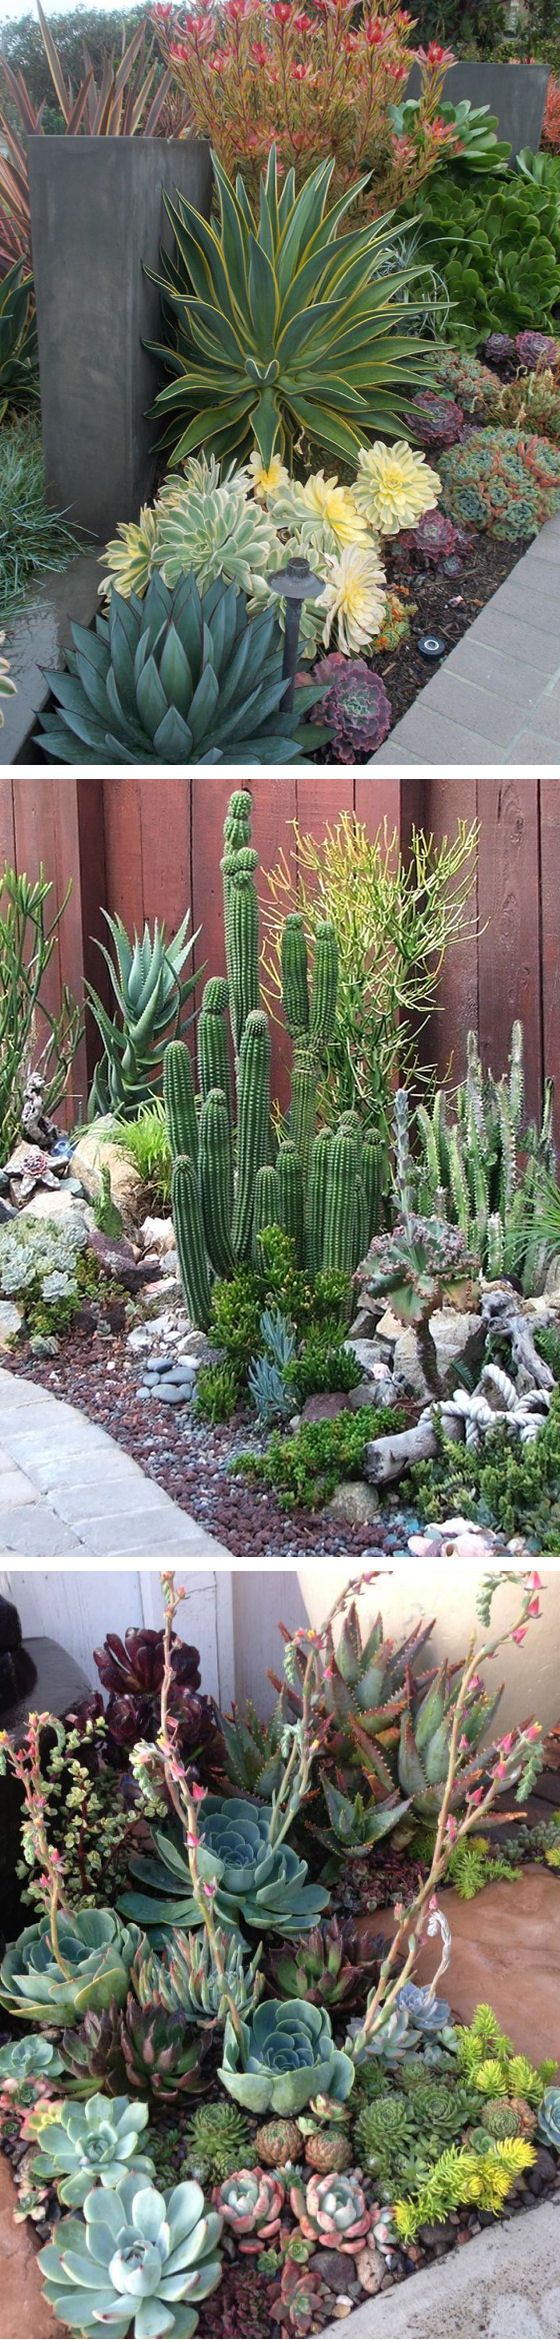 Drought-tolerant gardens are a great idea in our current climate! Via A Growing Obsession